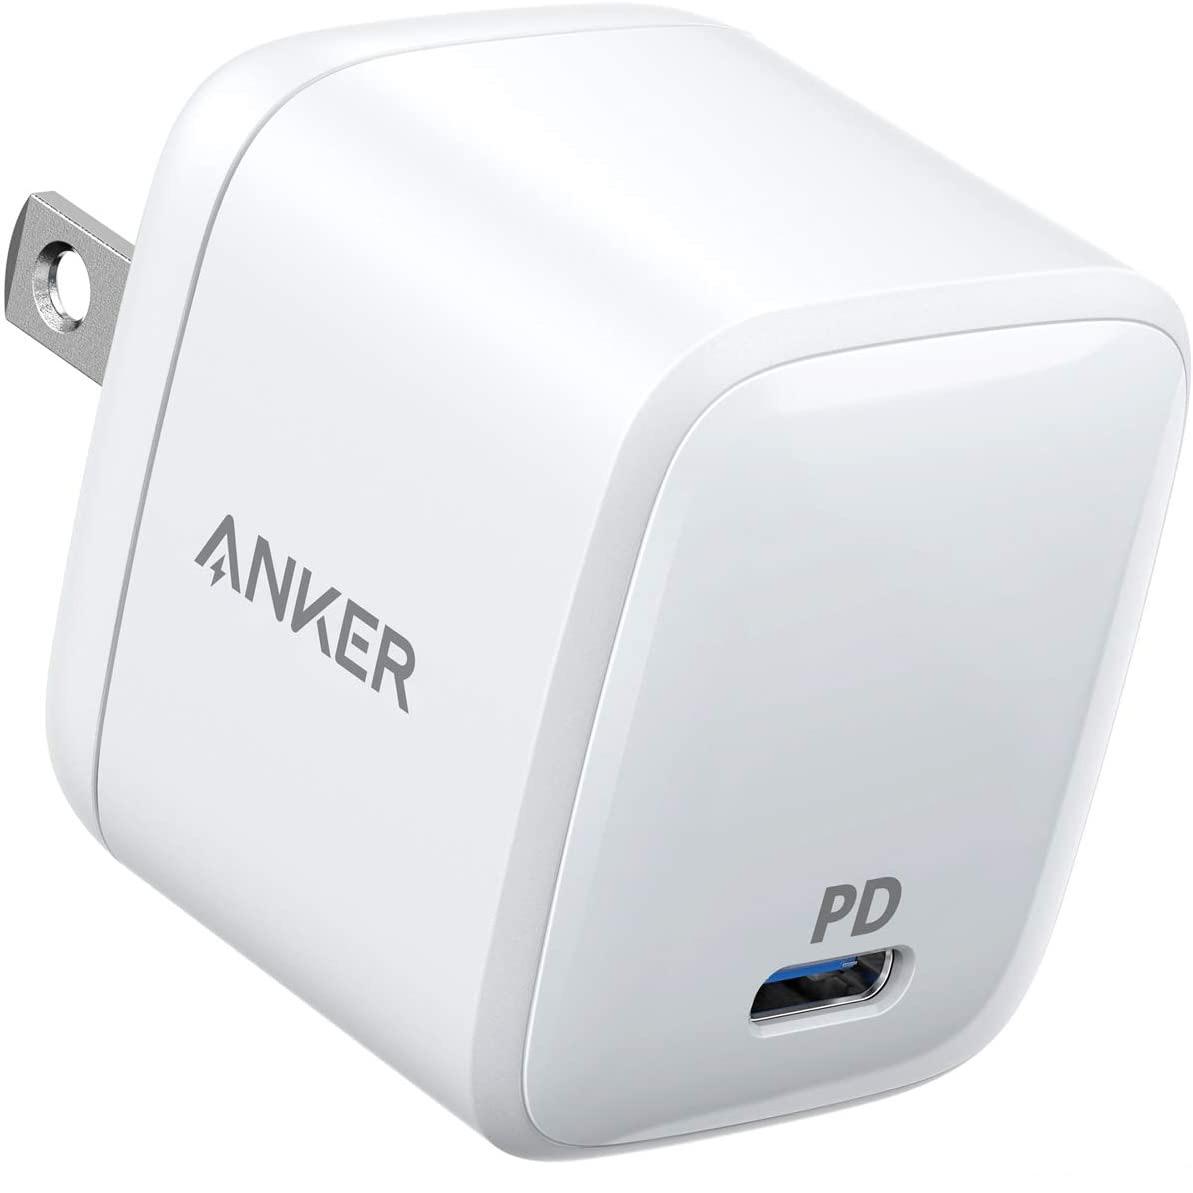 Apple iPhone 12 Anker USB-C Wall Charger for $18.99